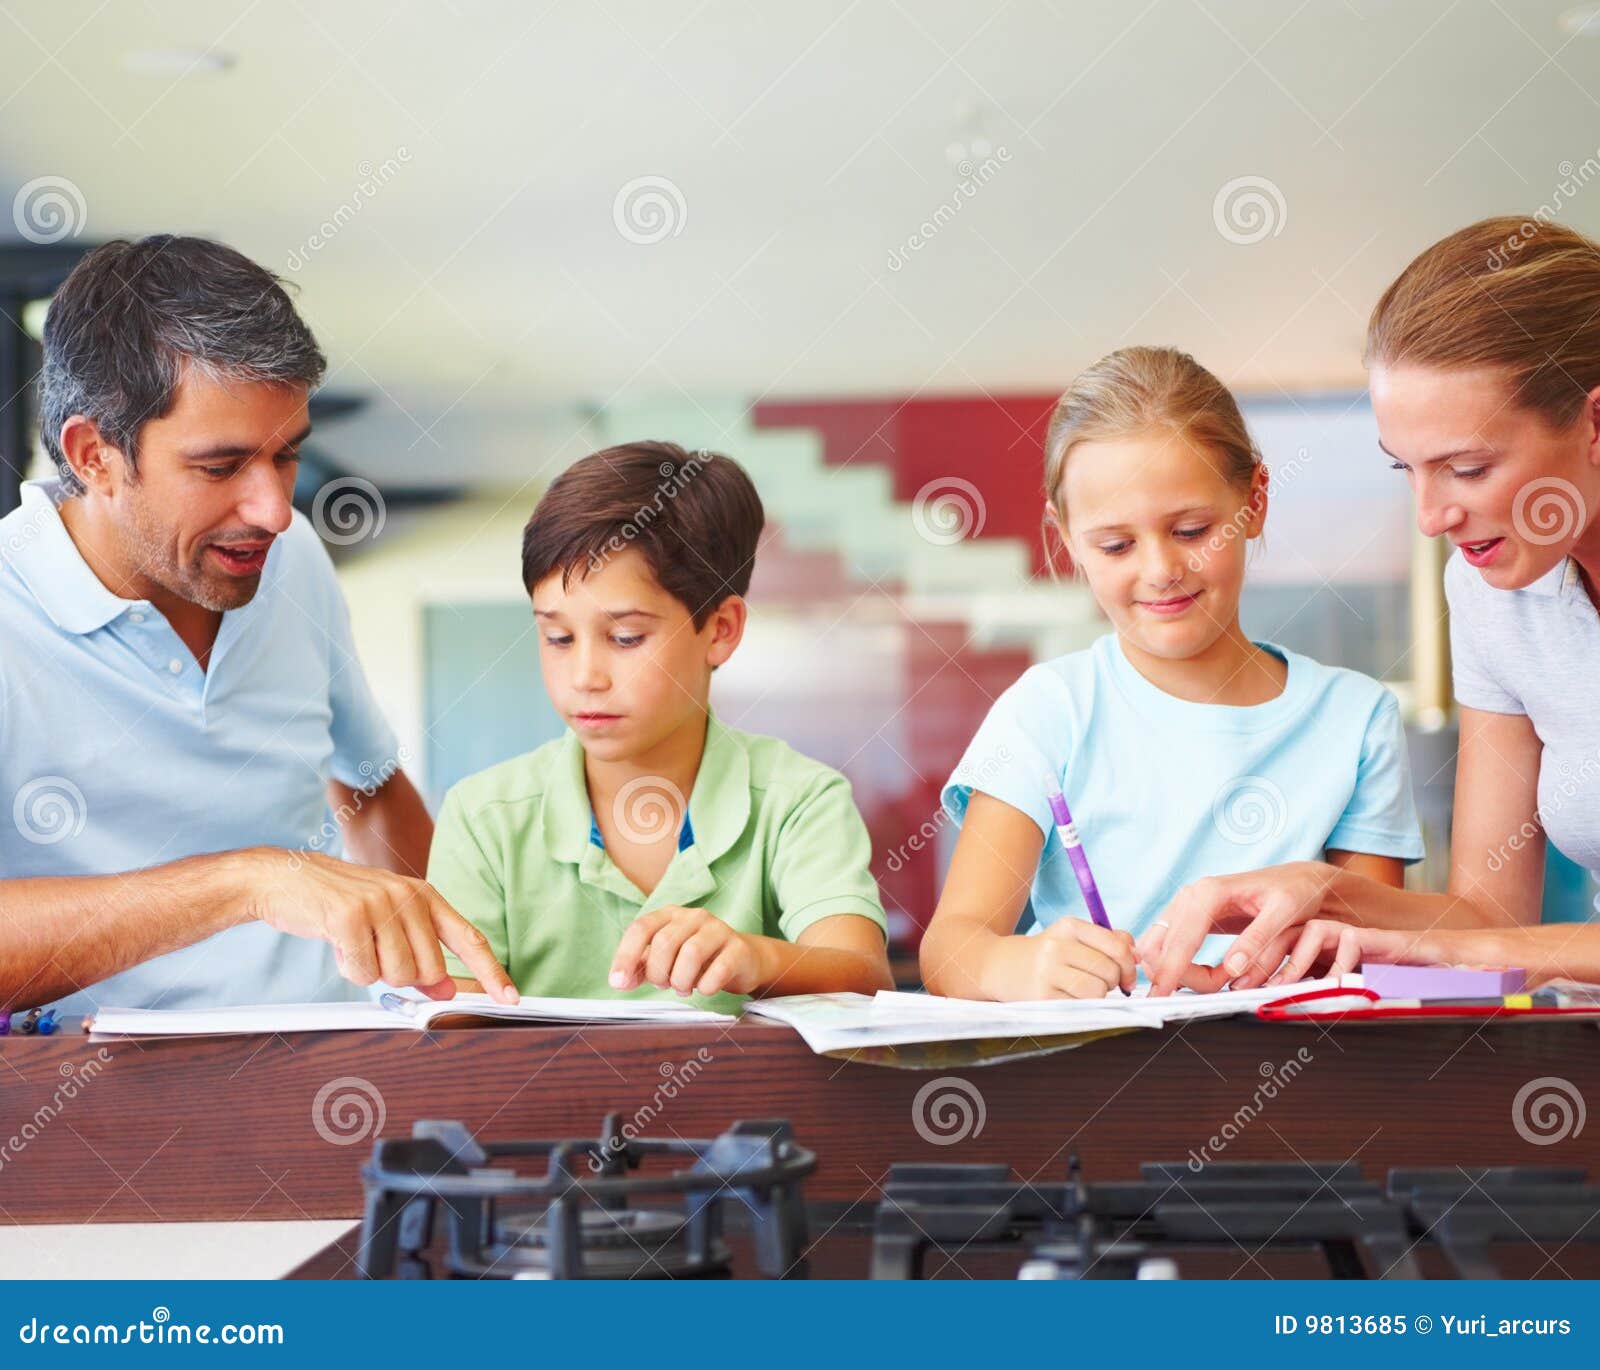 assisting with their homework